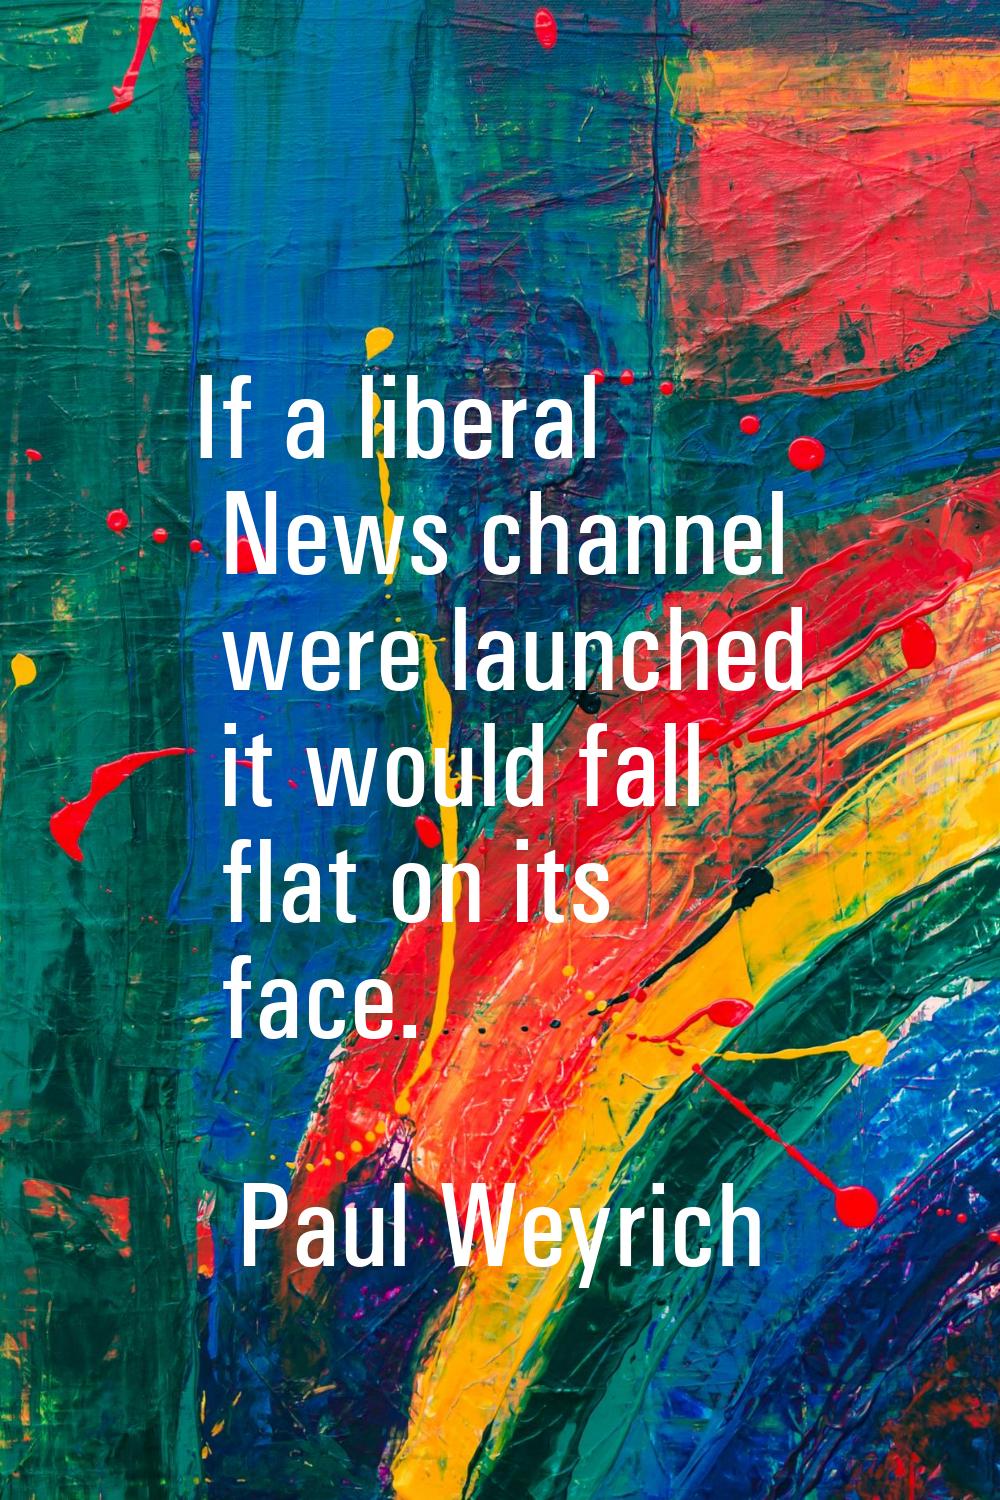 If a liberal News channel were launched it would fall flat on its face.